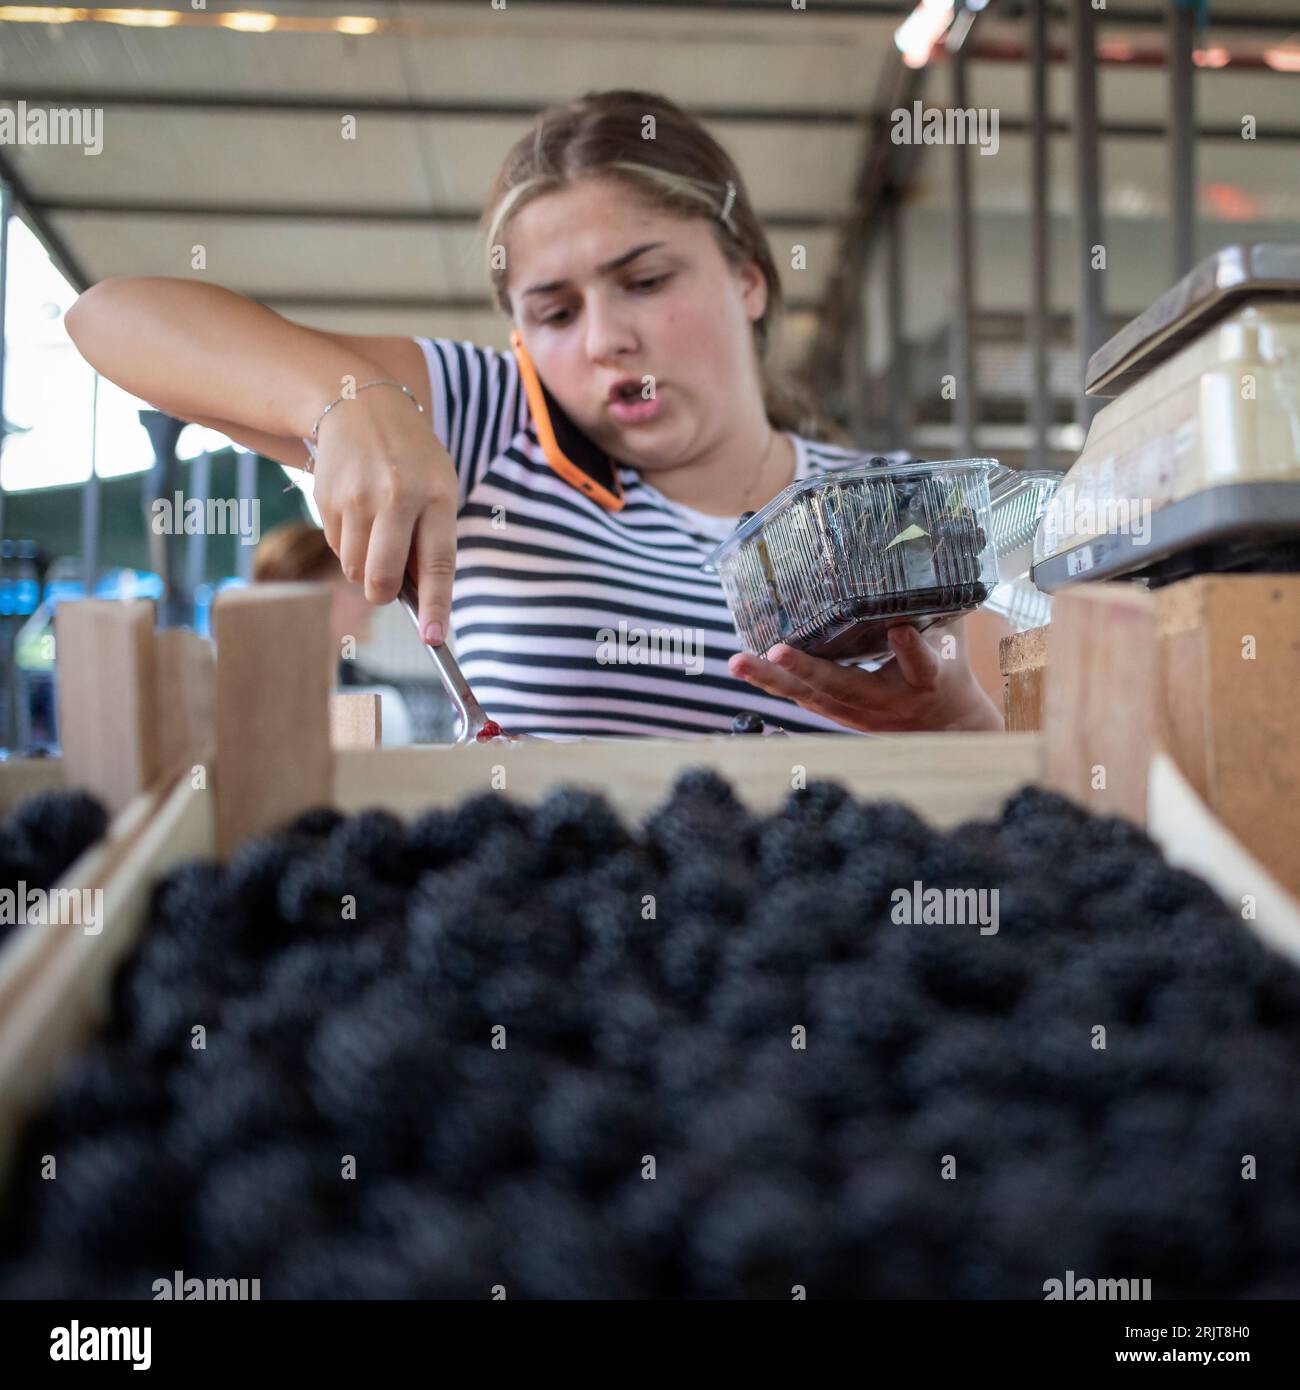 Belgrade, Serbia, Aug 19, 2023: A young woman, stallholder at a greenmarket, talking on the phone and serving a customer Stock Photo